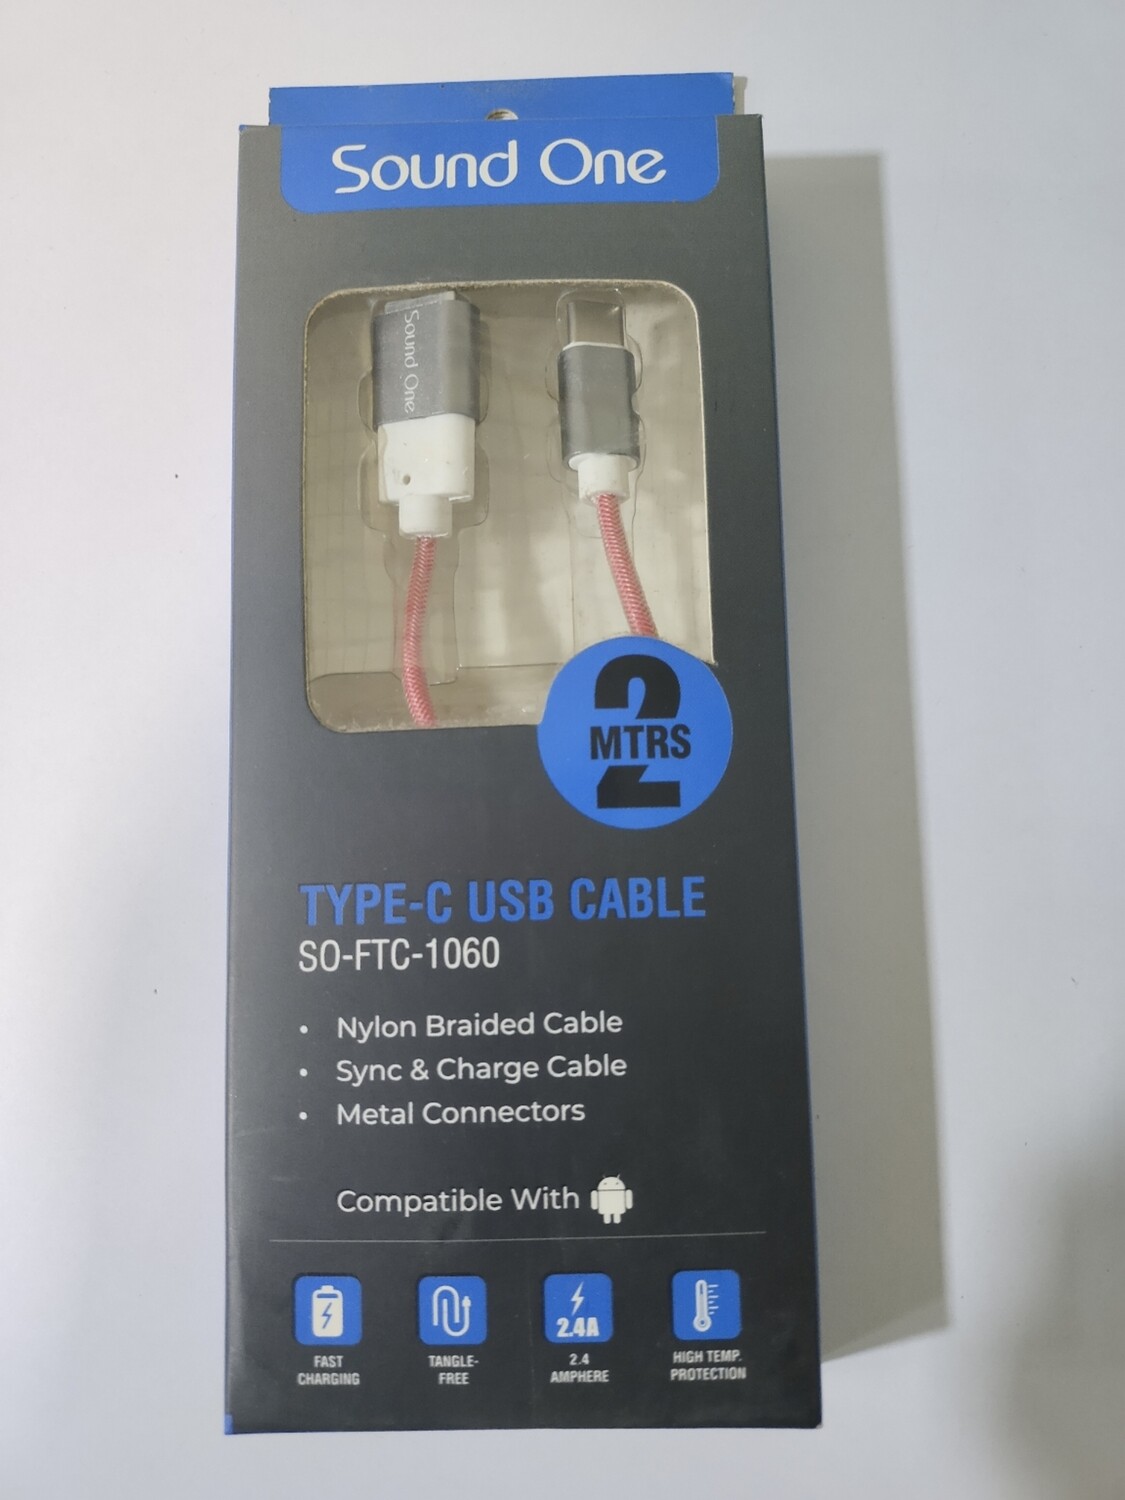 Sound One 2mtr TYPE-C USB Cable